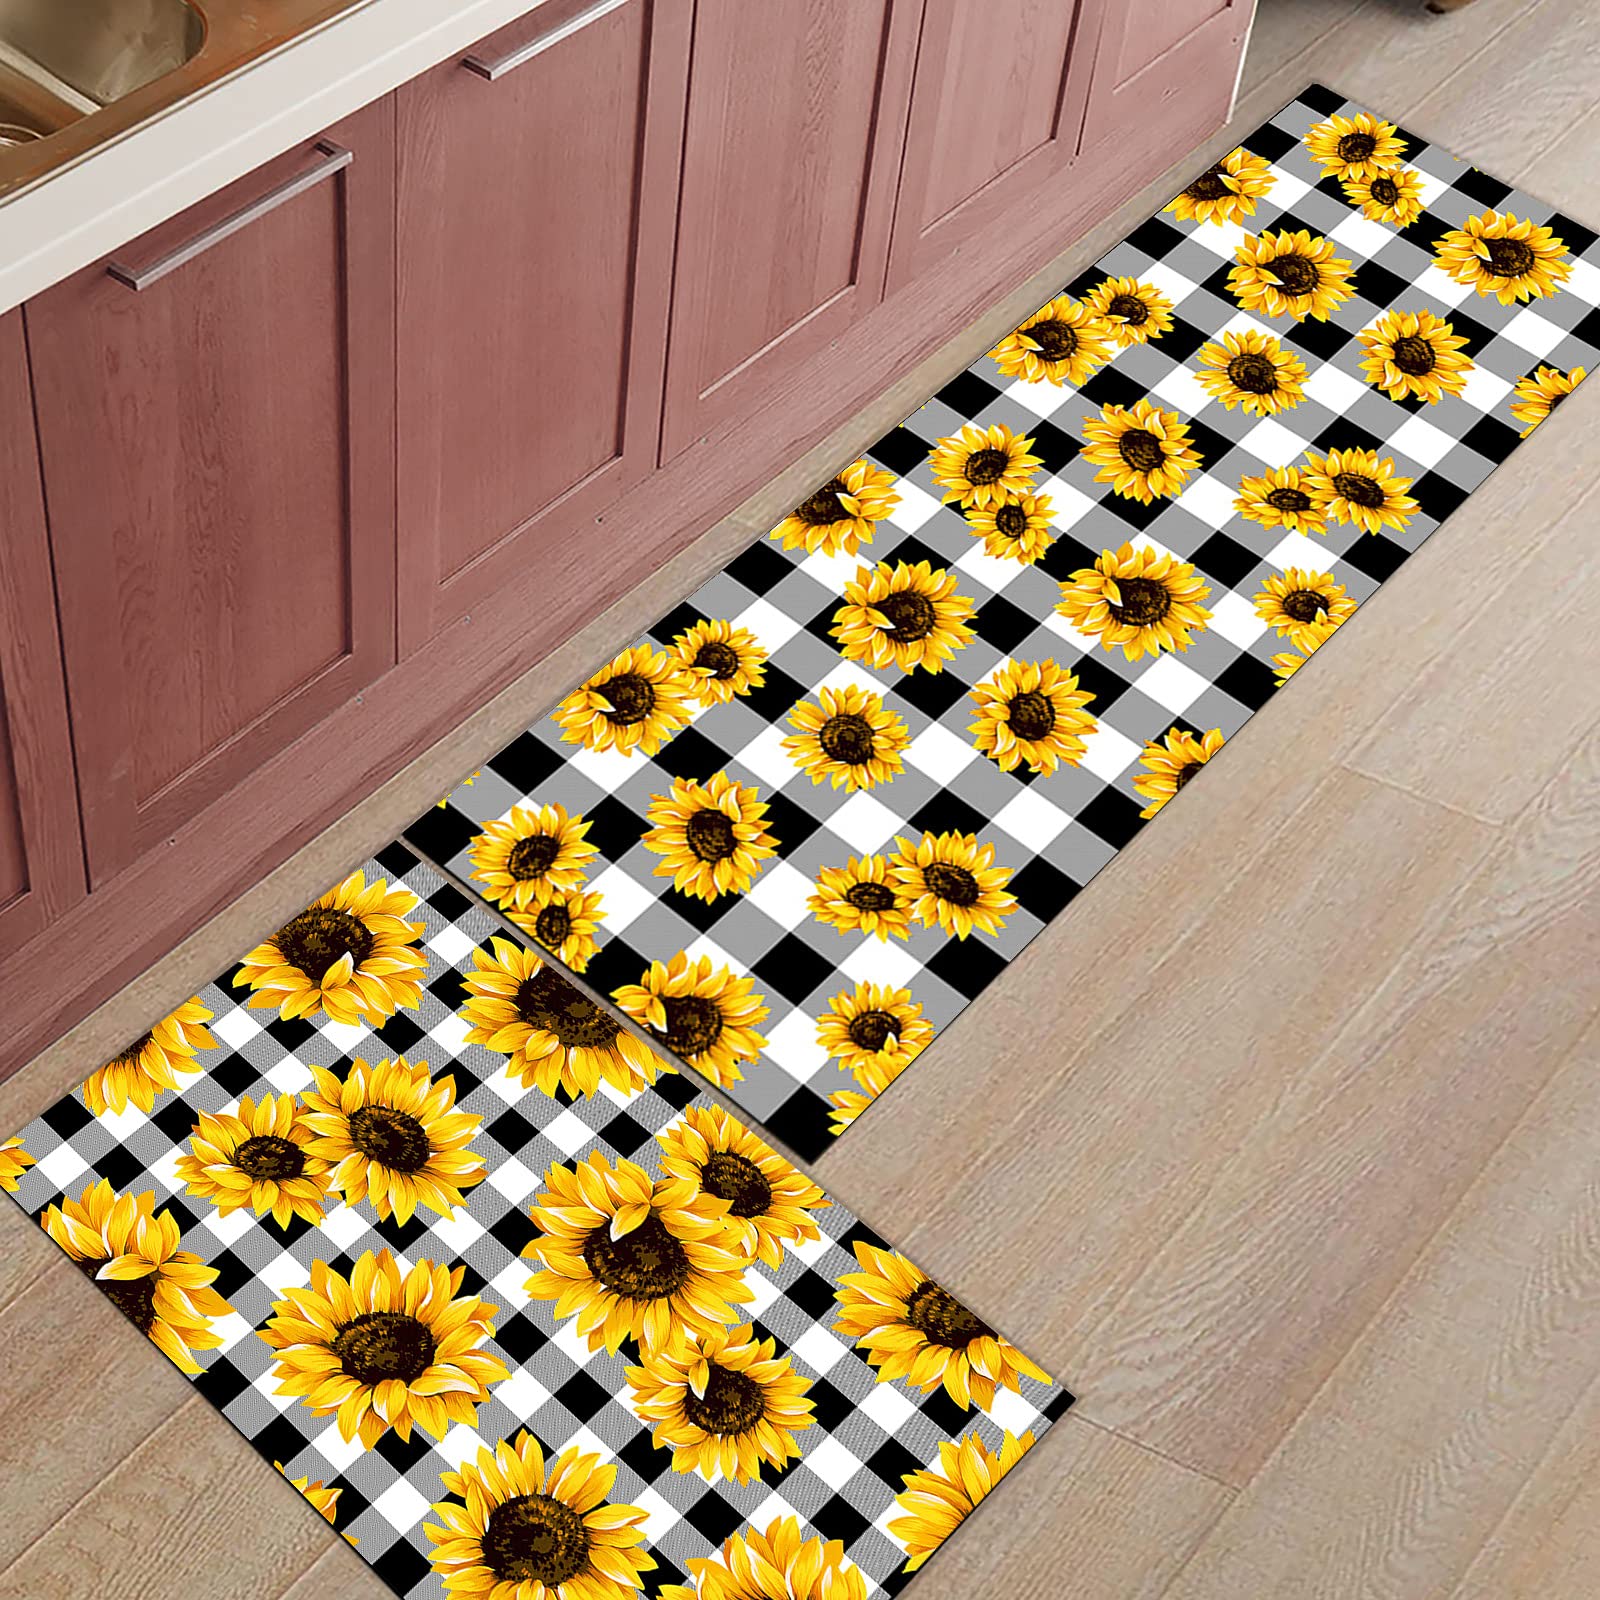 Sailground Kitchen Rugs and Mats Sets of 2, Summer Fresh Sunflower Black Buffalo Check Plaid Sweet Farm Life Time Indoor Floor Mats Non-Slip Area Rug Carpet for Bathroom Living Room Office Home Decor